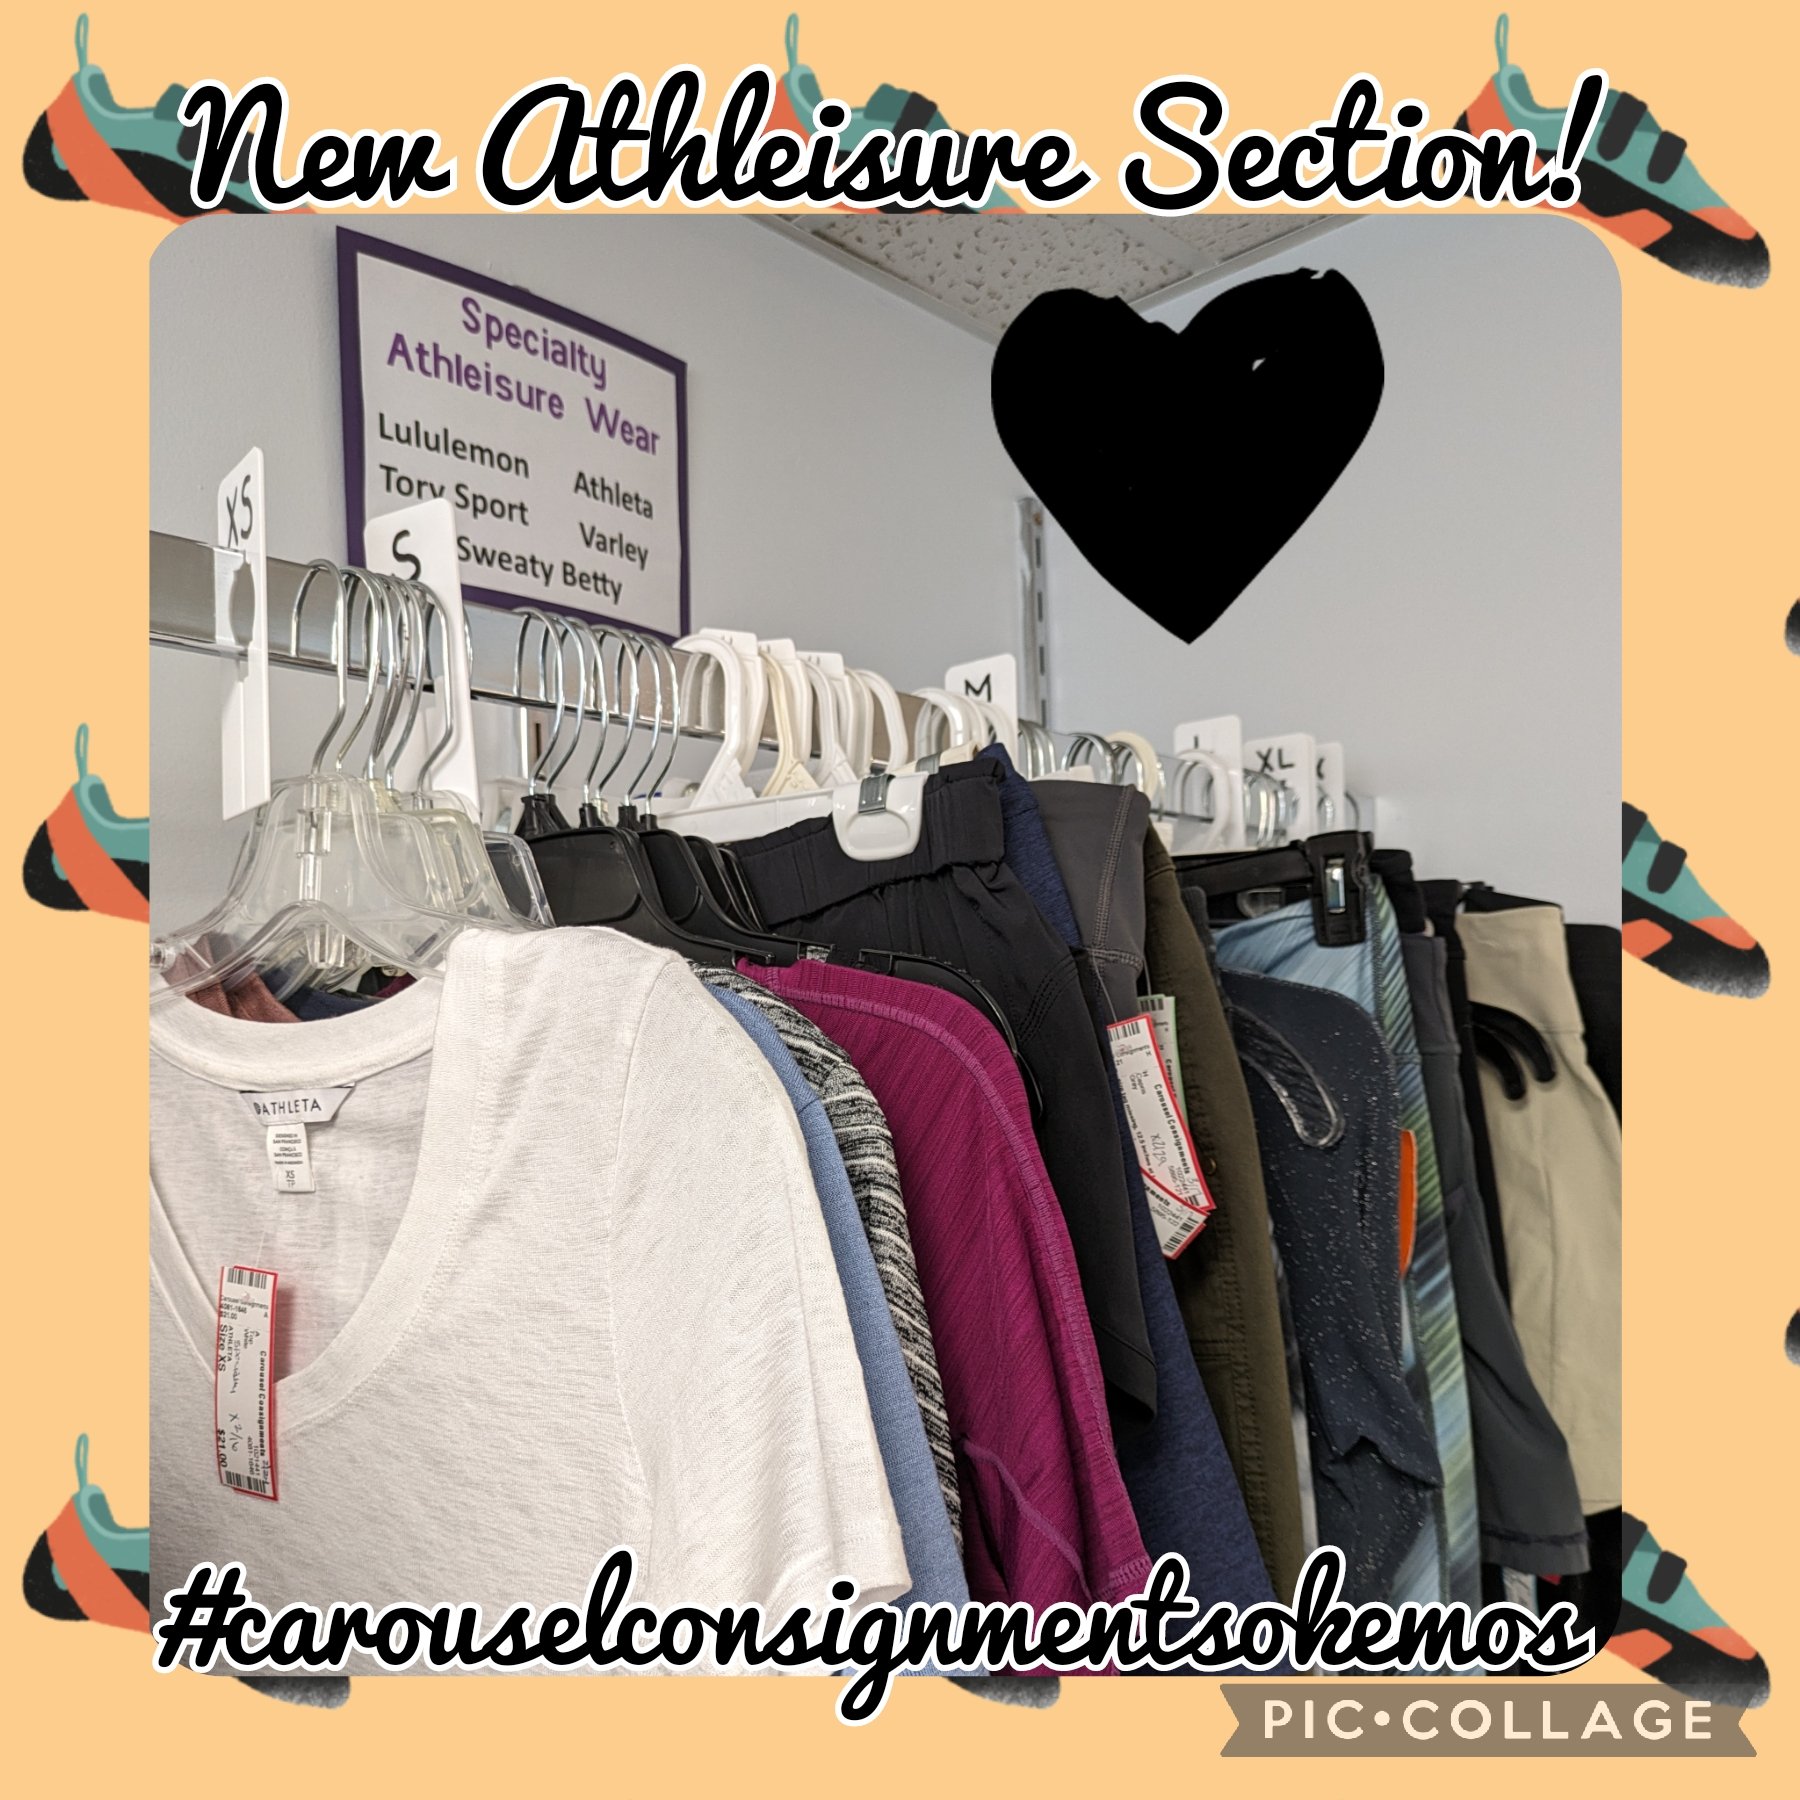 ➡️New Ahtleisure Section⬅️
Check out our new section where you will find all of your favorite athleisure brands including Lululemon, Athleta, Sweaty Betty, Varley, Tory Sport, Vuori and more!